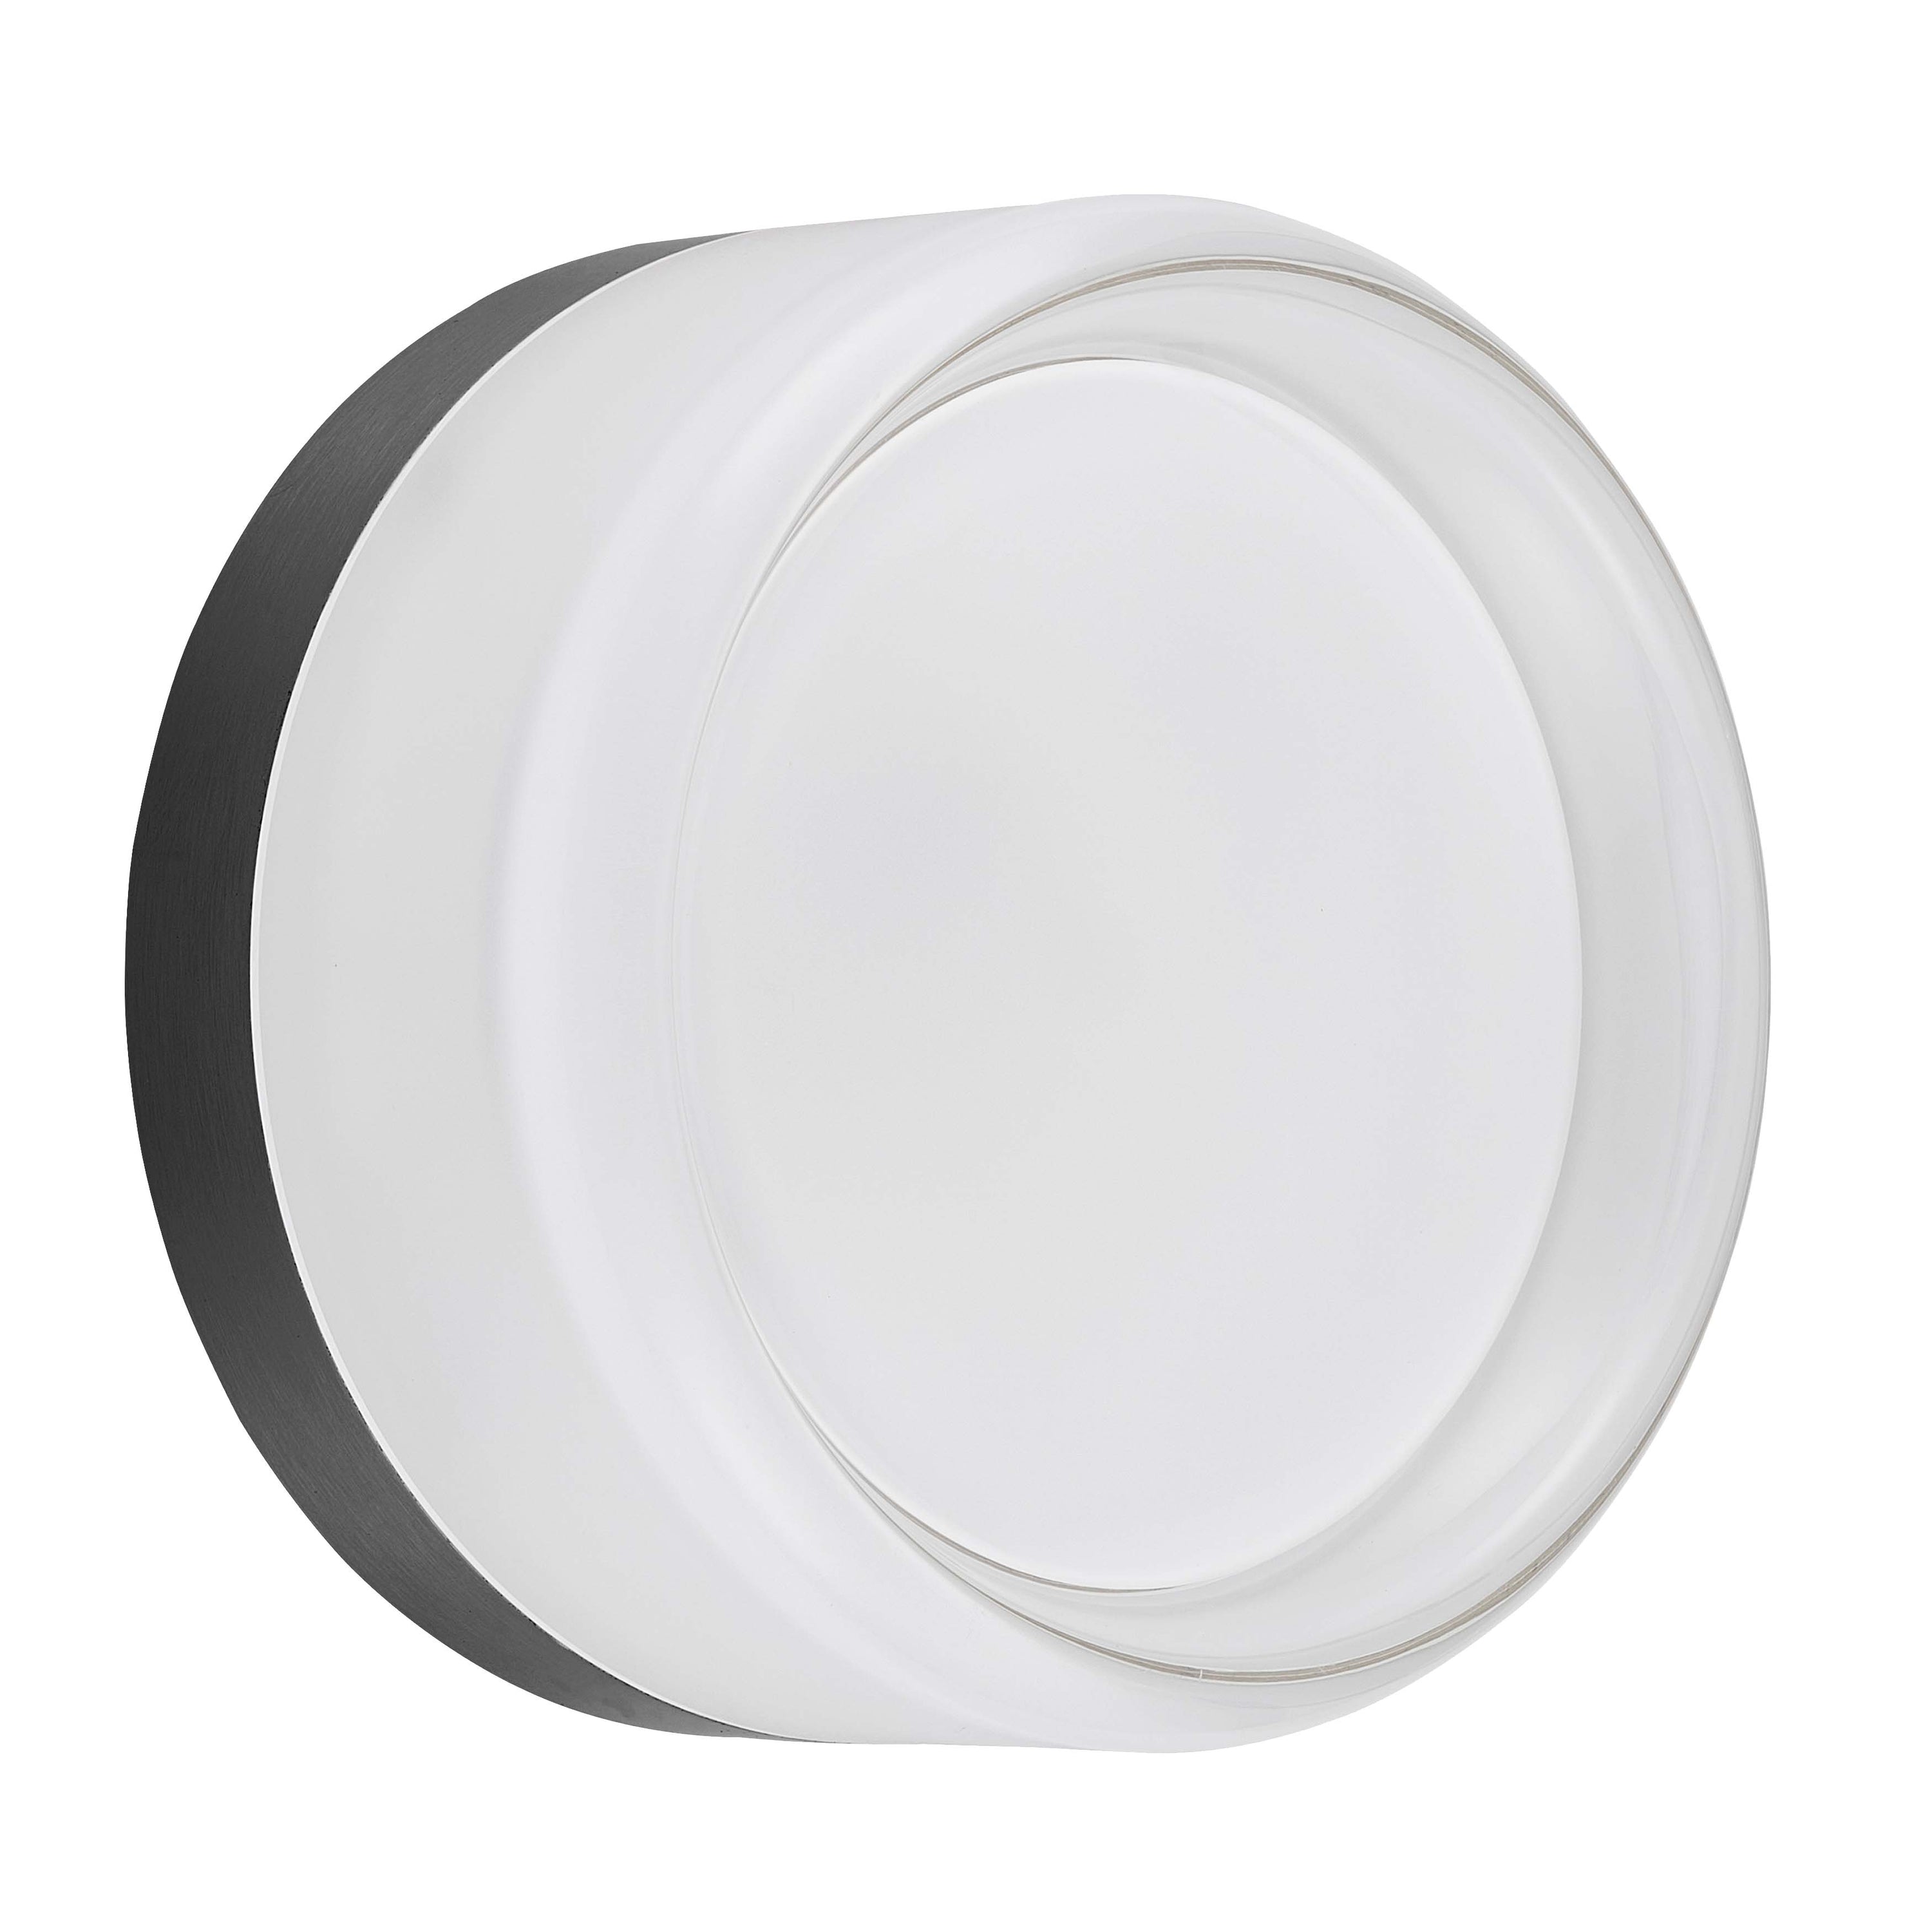 Dainolite LUC-515LEDW-MB 15W Wall Sconce Matte Black with Clear & Frosted Acrylic Diffuser